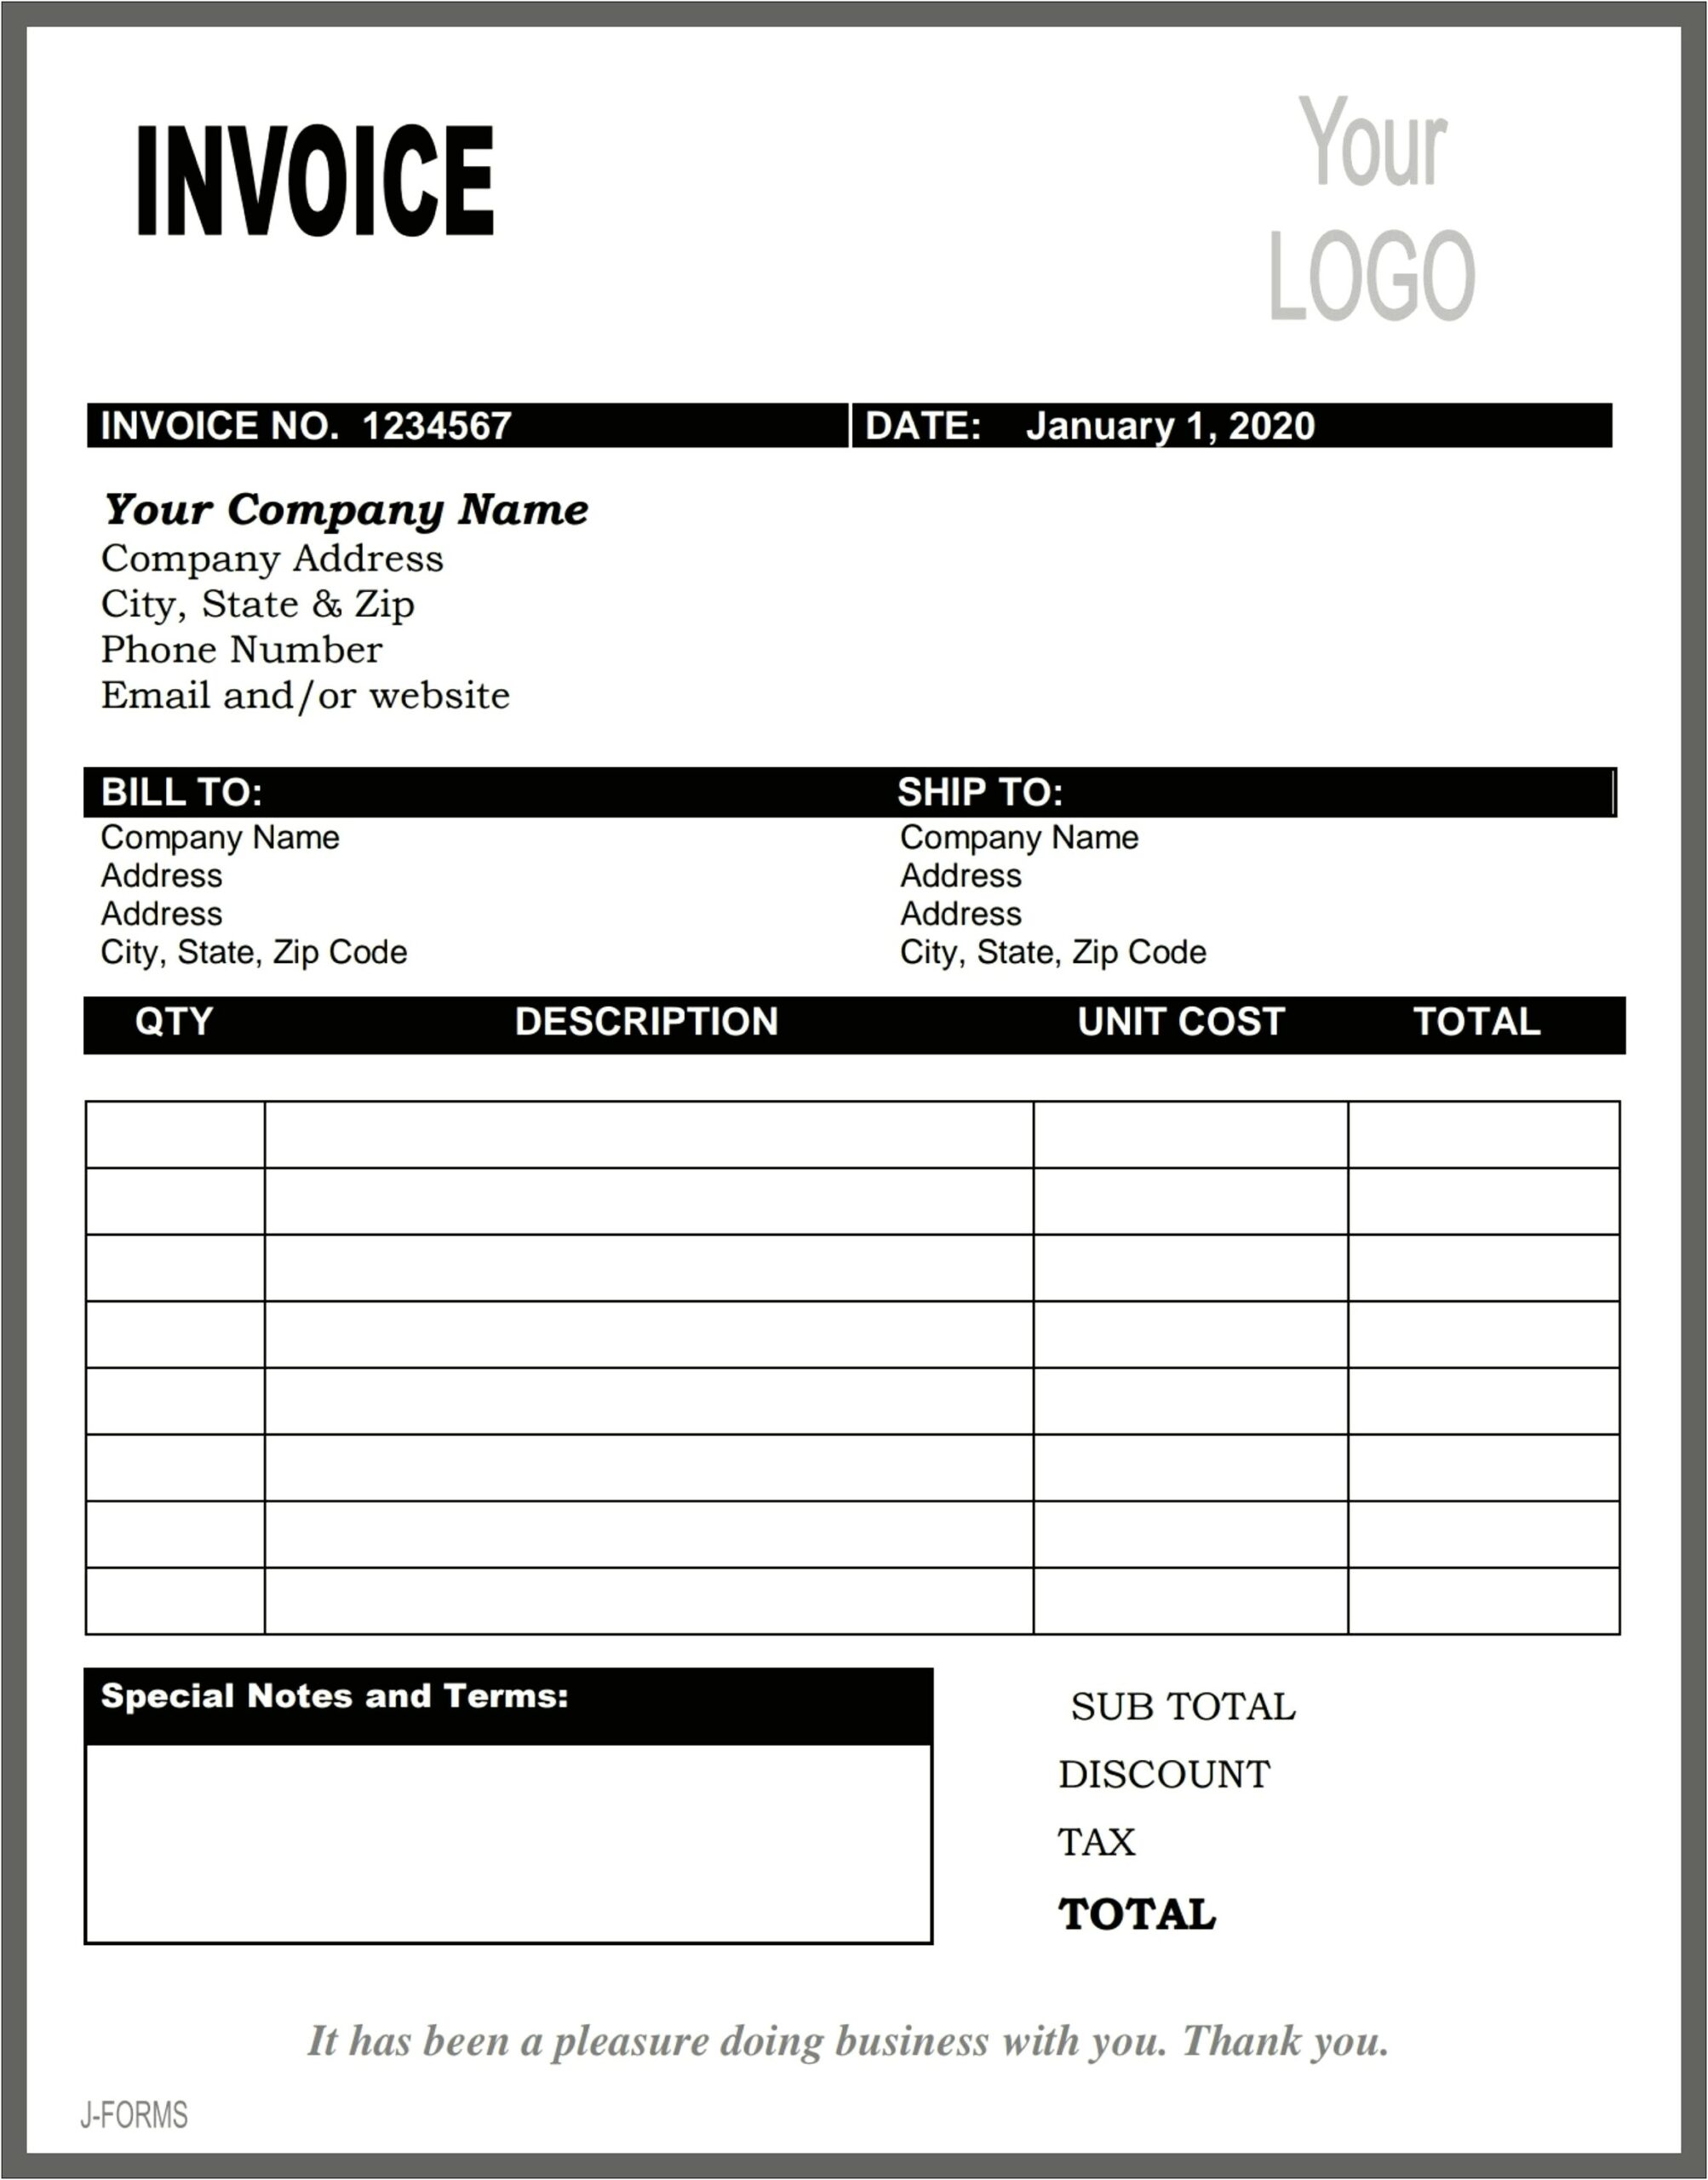 Used Car Receipt Word Template Uk